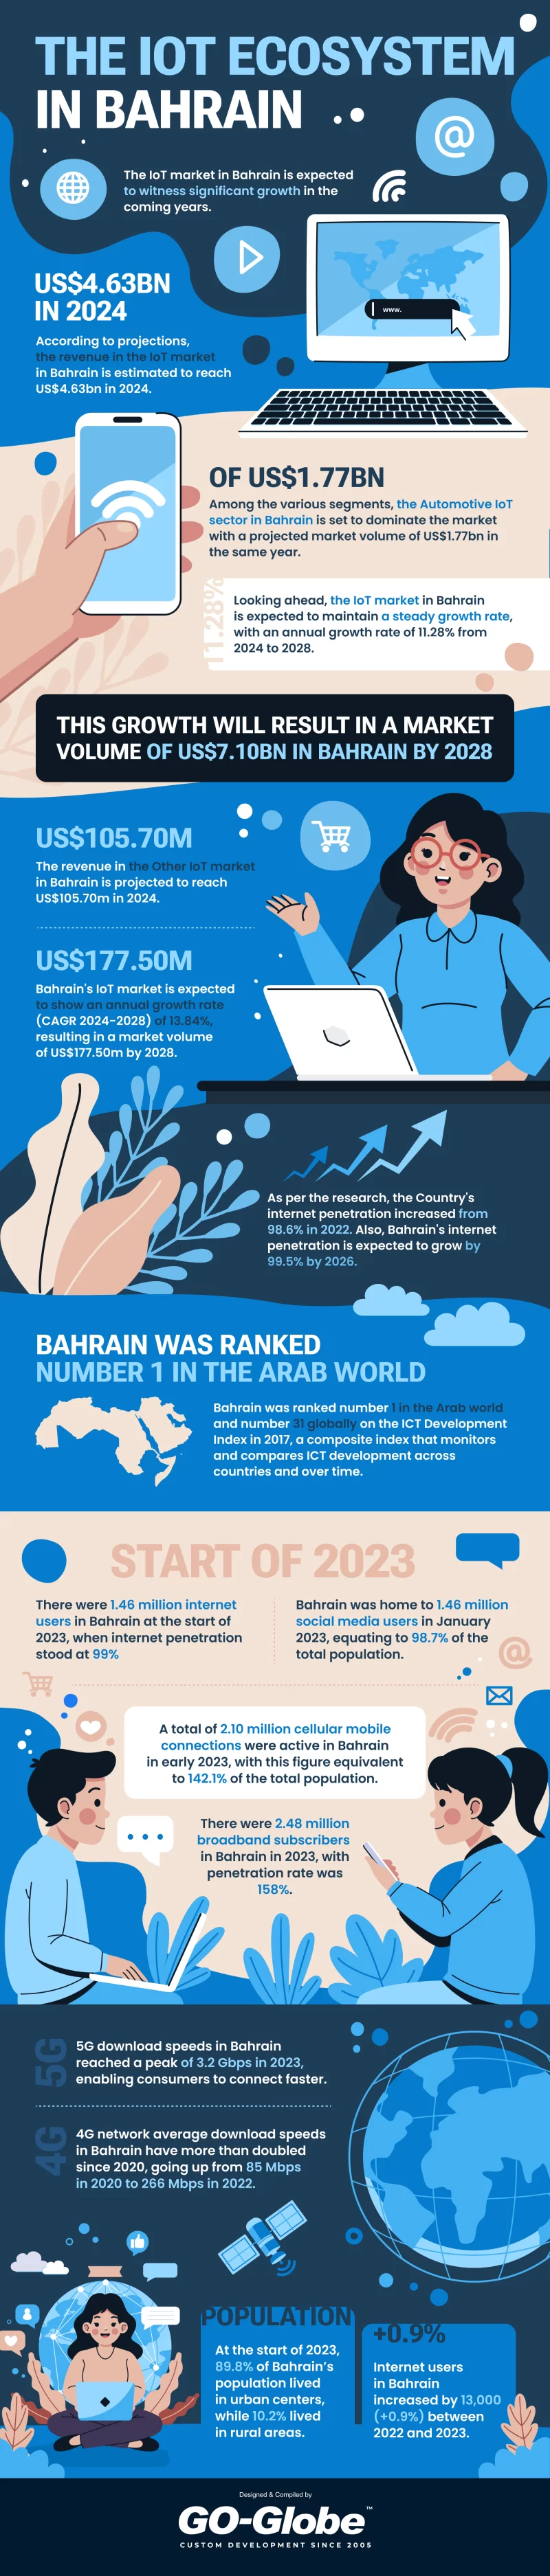 The IoT Ecosystem in Bahrain